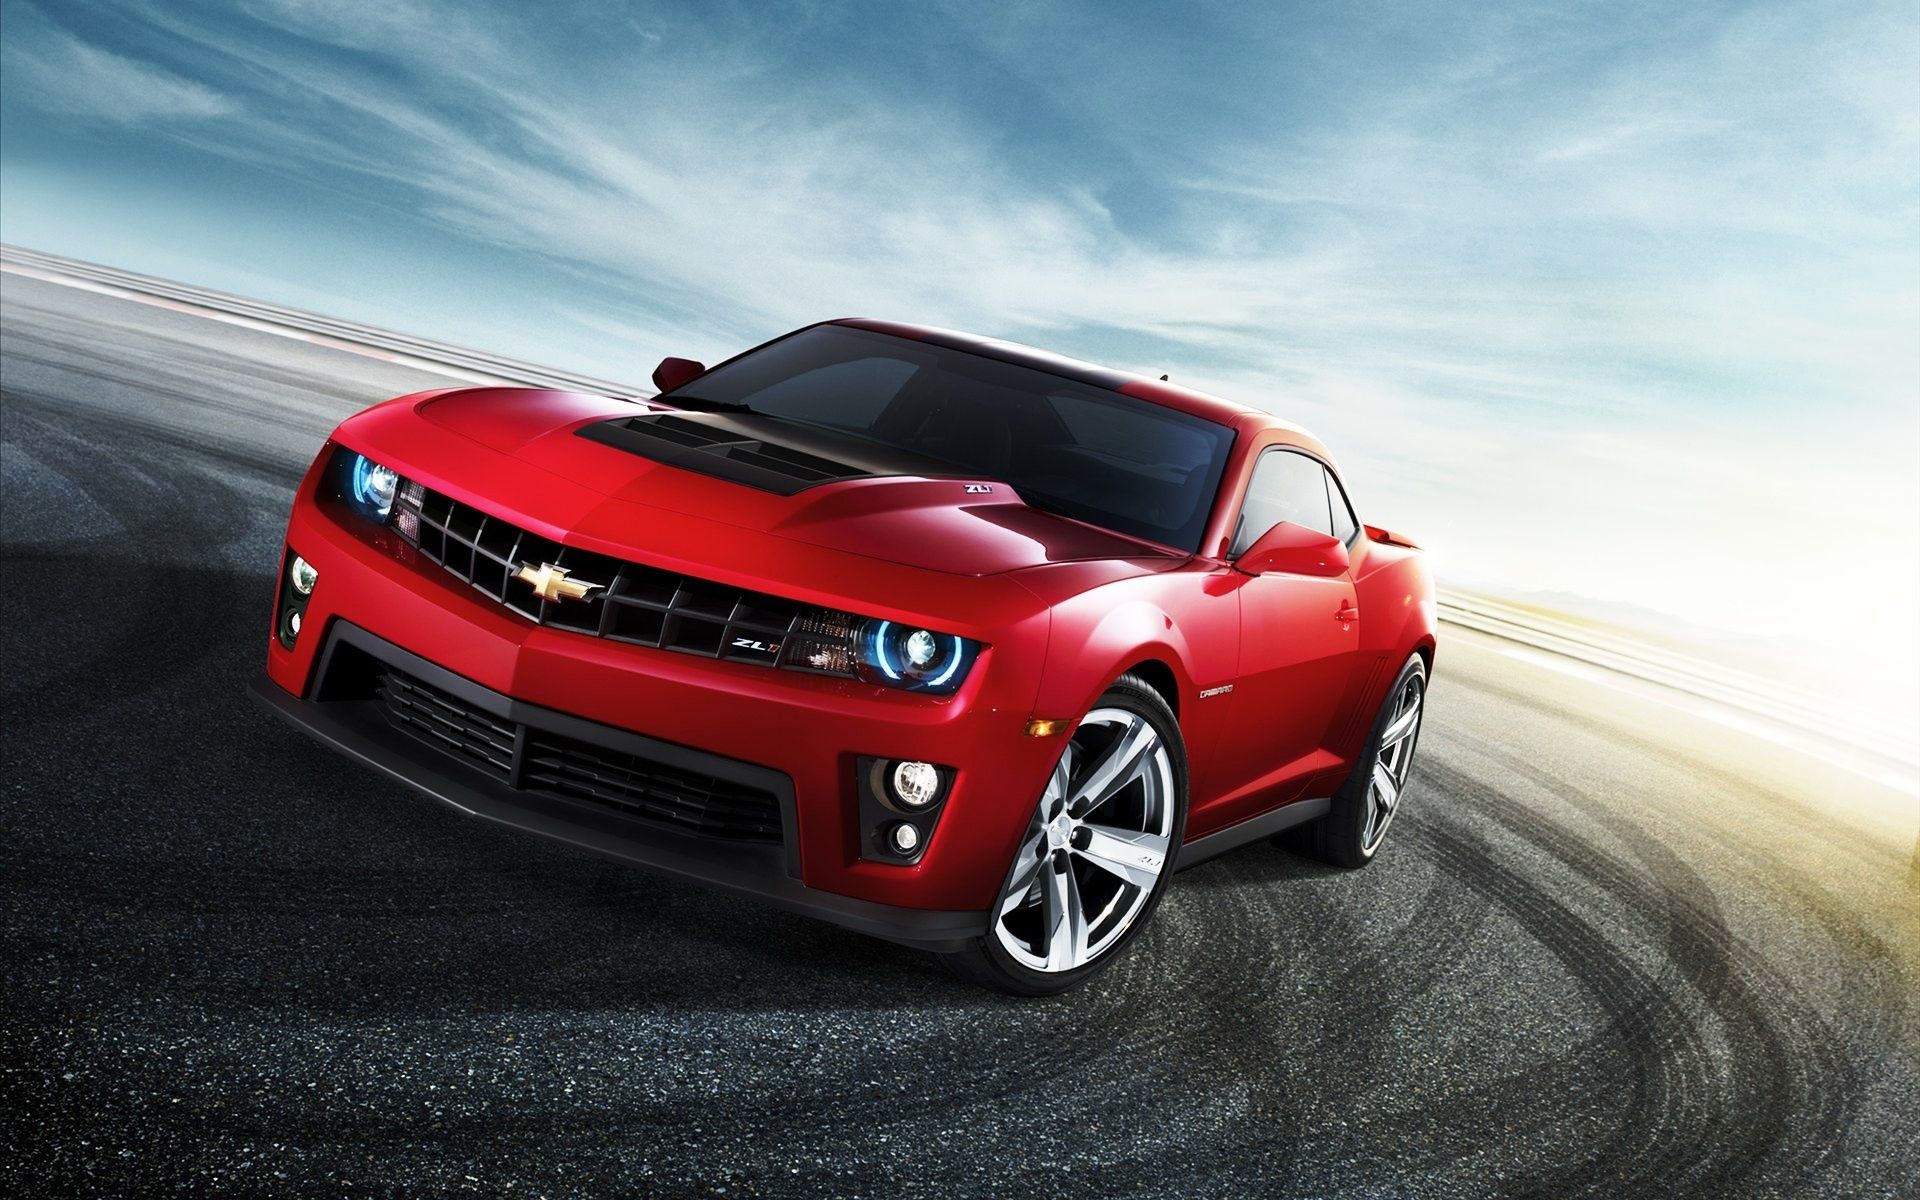 Red Car Wallpapers  Top 25 Best Red Car Wallpapers  HQ 